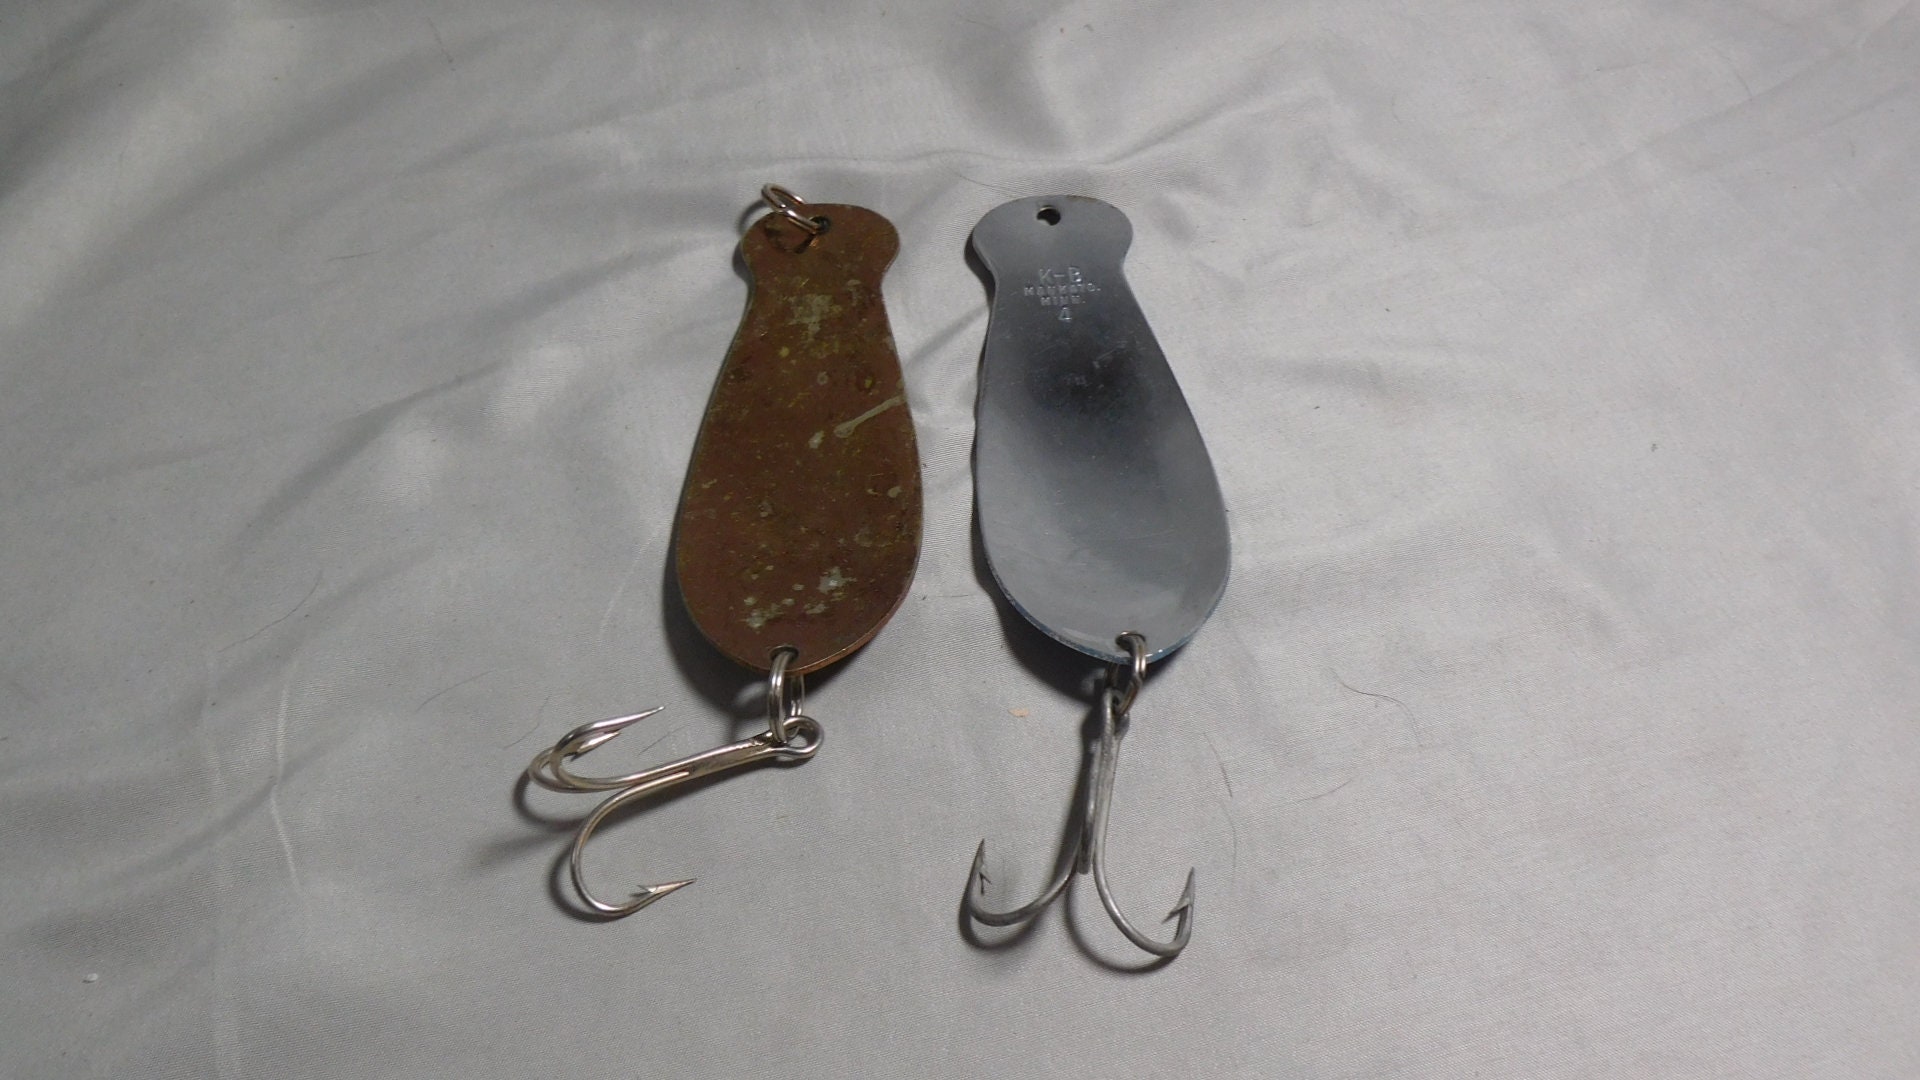 Fishing Lures for sale in Mankato, Minnesota